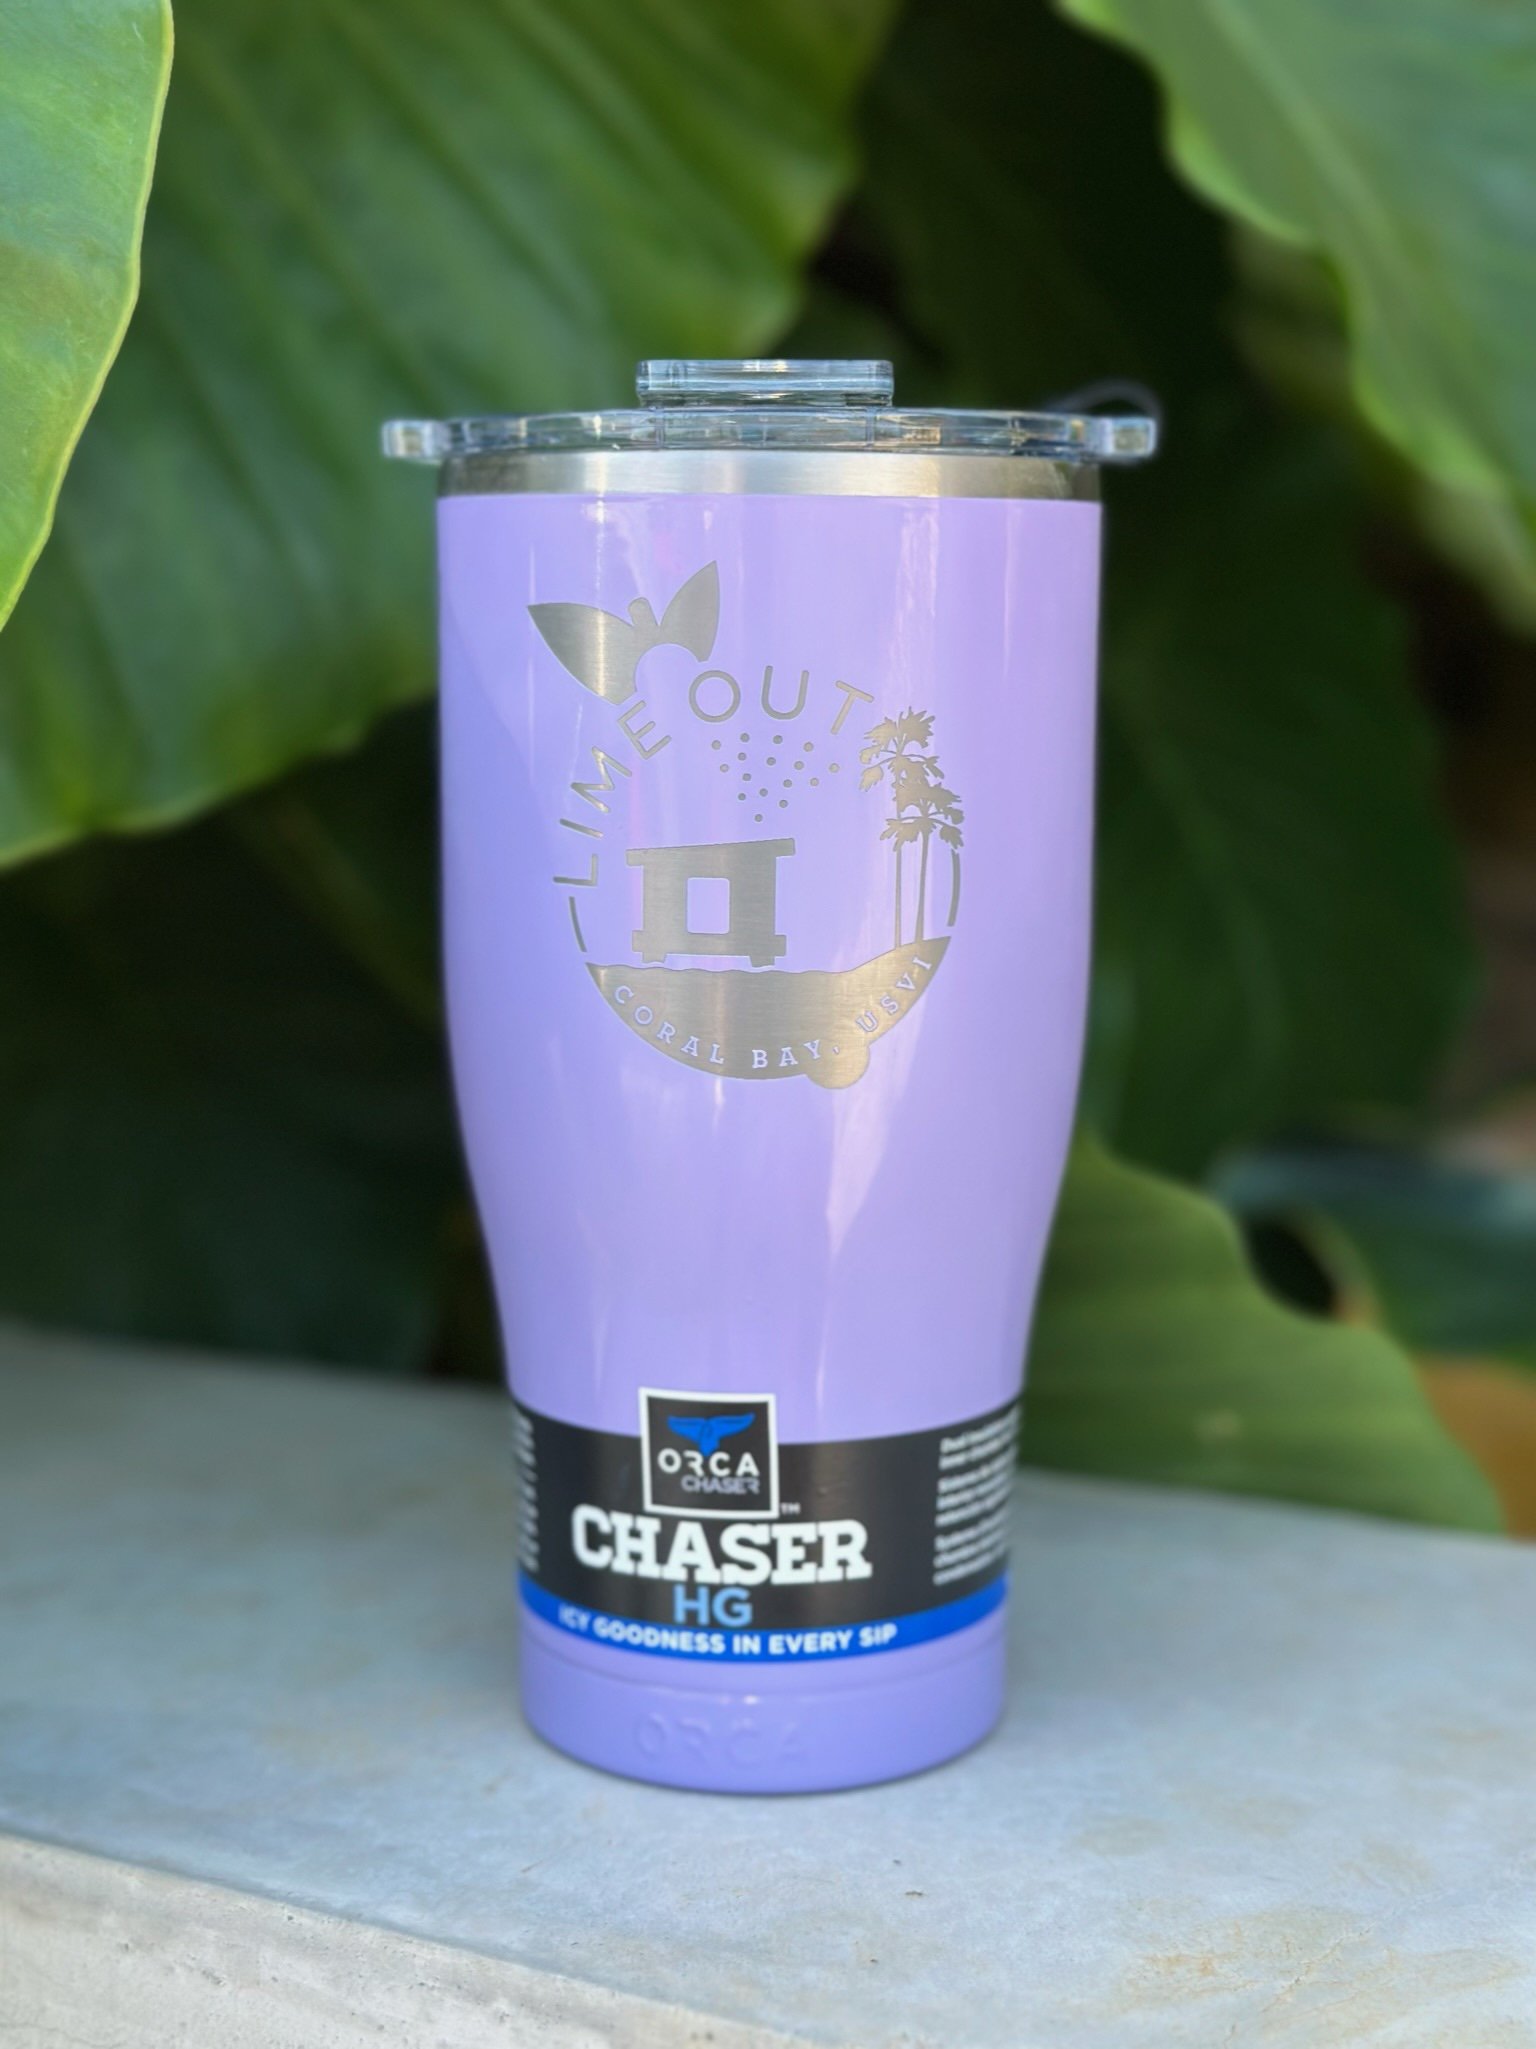 ORCA Chaser Cup, Seafoam/Clear, 27 oz 